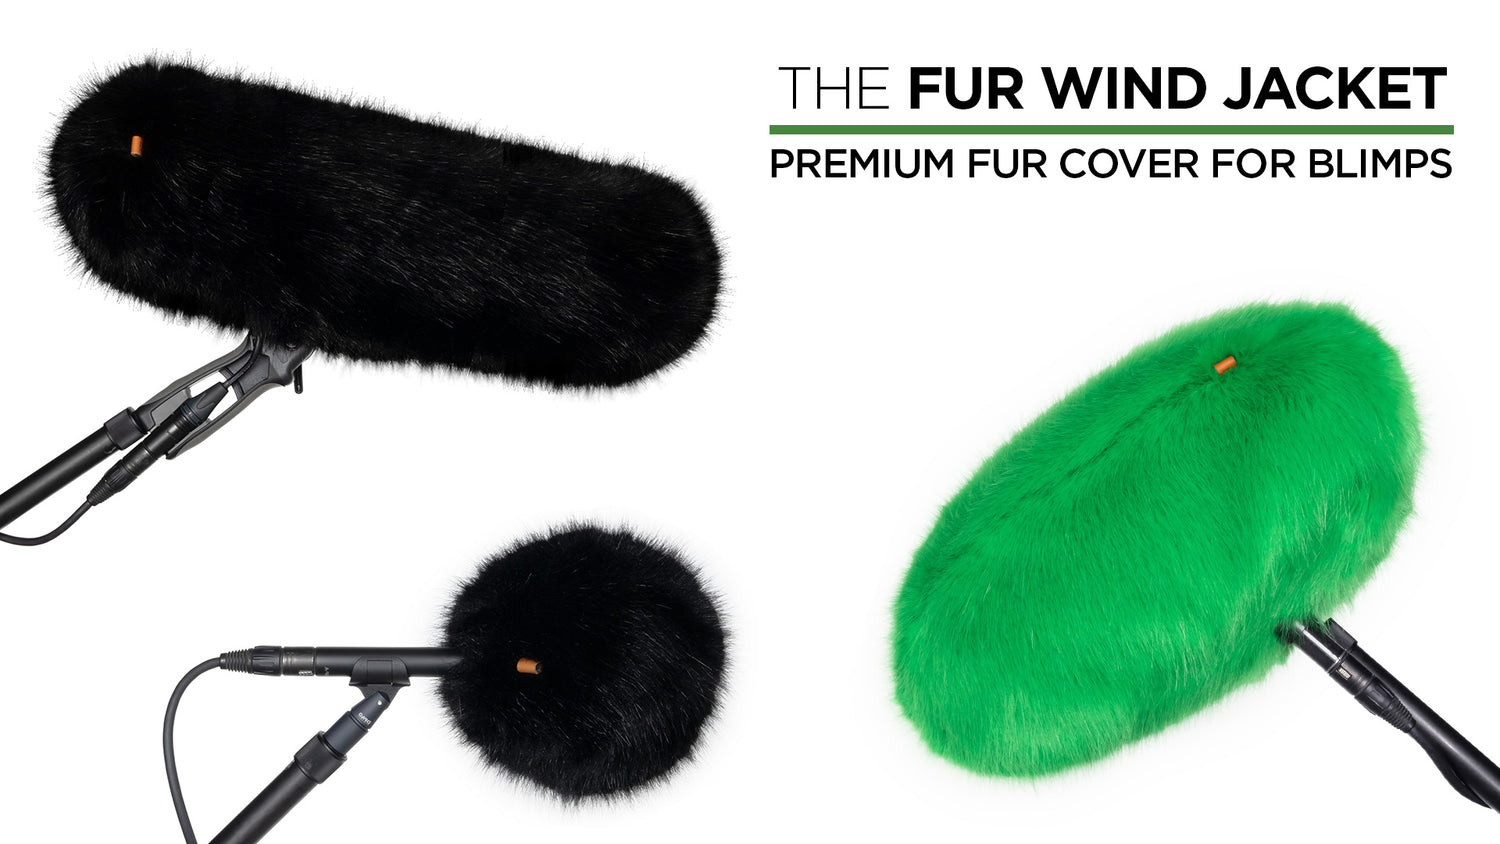 Introducing The Fur Wind Jacket - Premium Fur Cover For Blimps